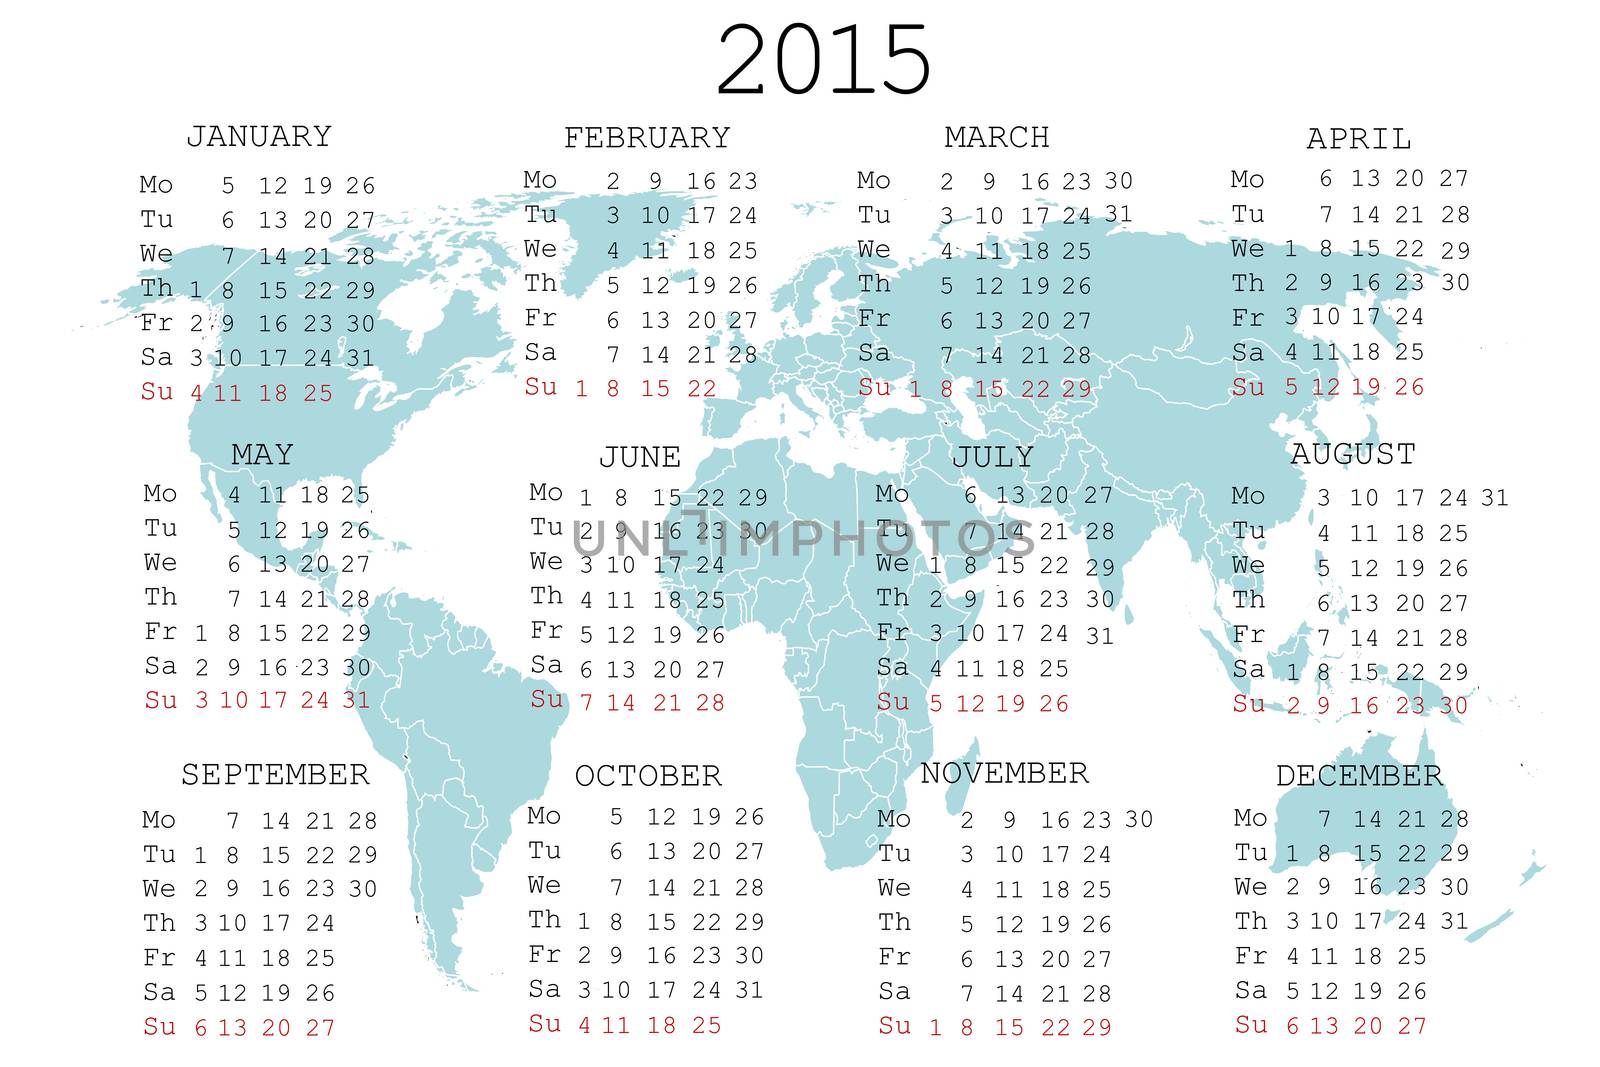 2015 calendar with world map by hibrida13